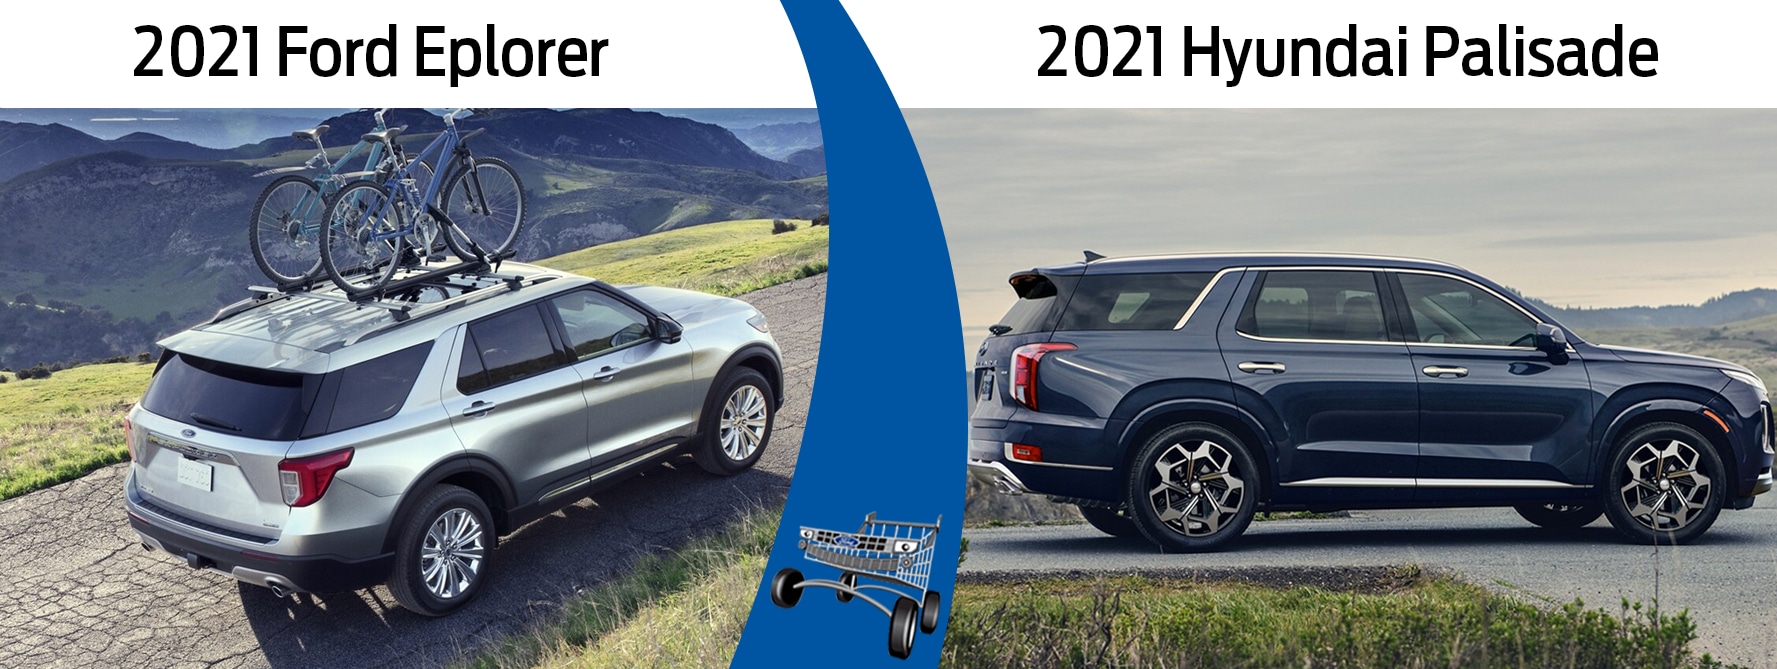 Comparing the 2021 Ford Explorer vs. the 2021 Hyundai Palisade in